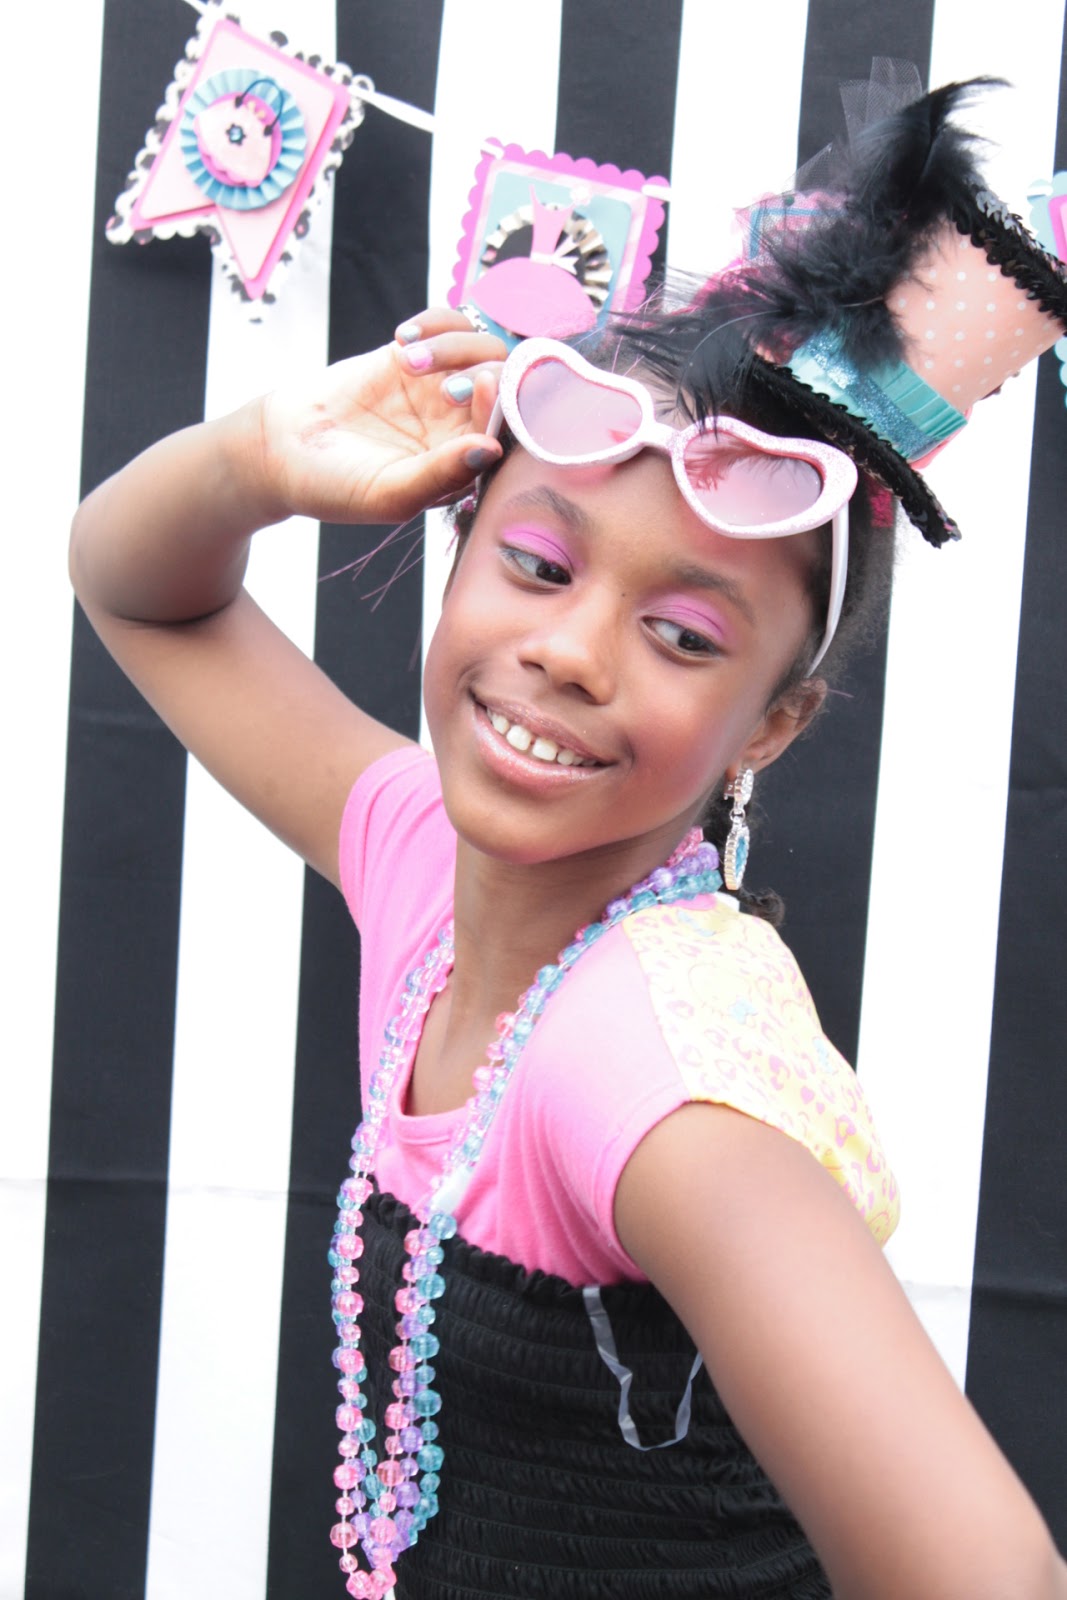 Cupcake Wishes & Birthday Dreams: Fashionista Dress Up Party Photo ...